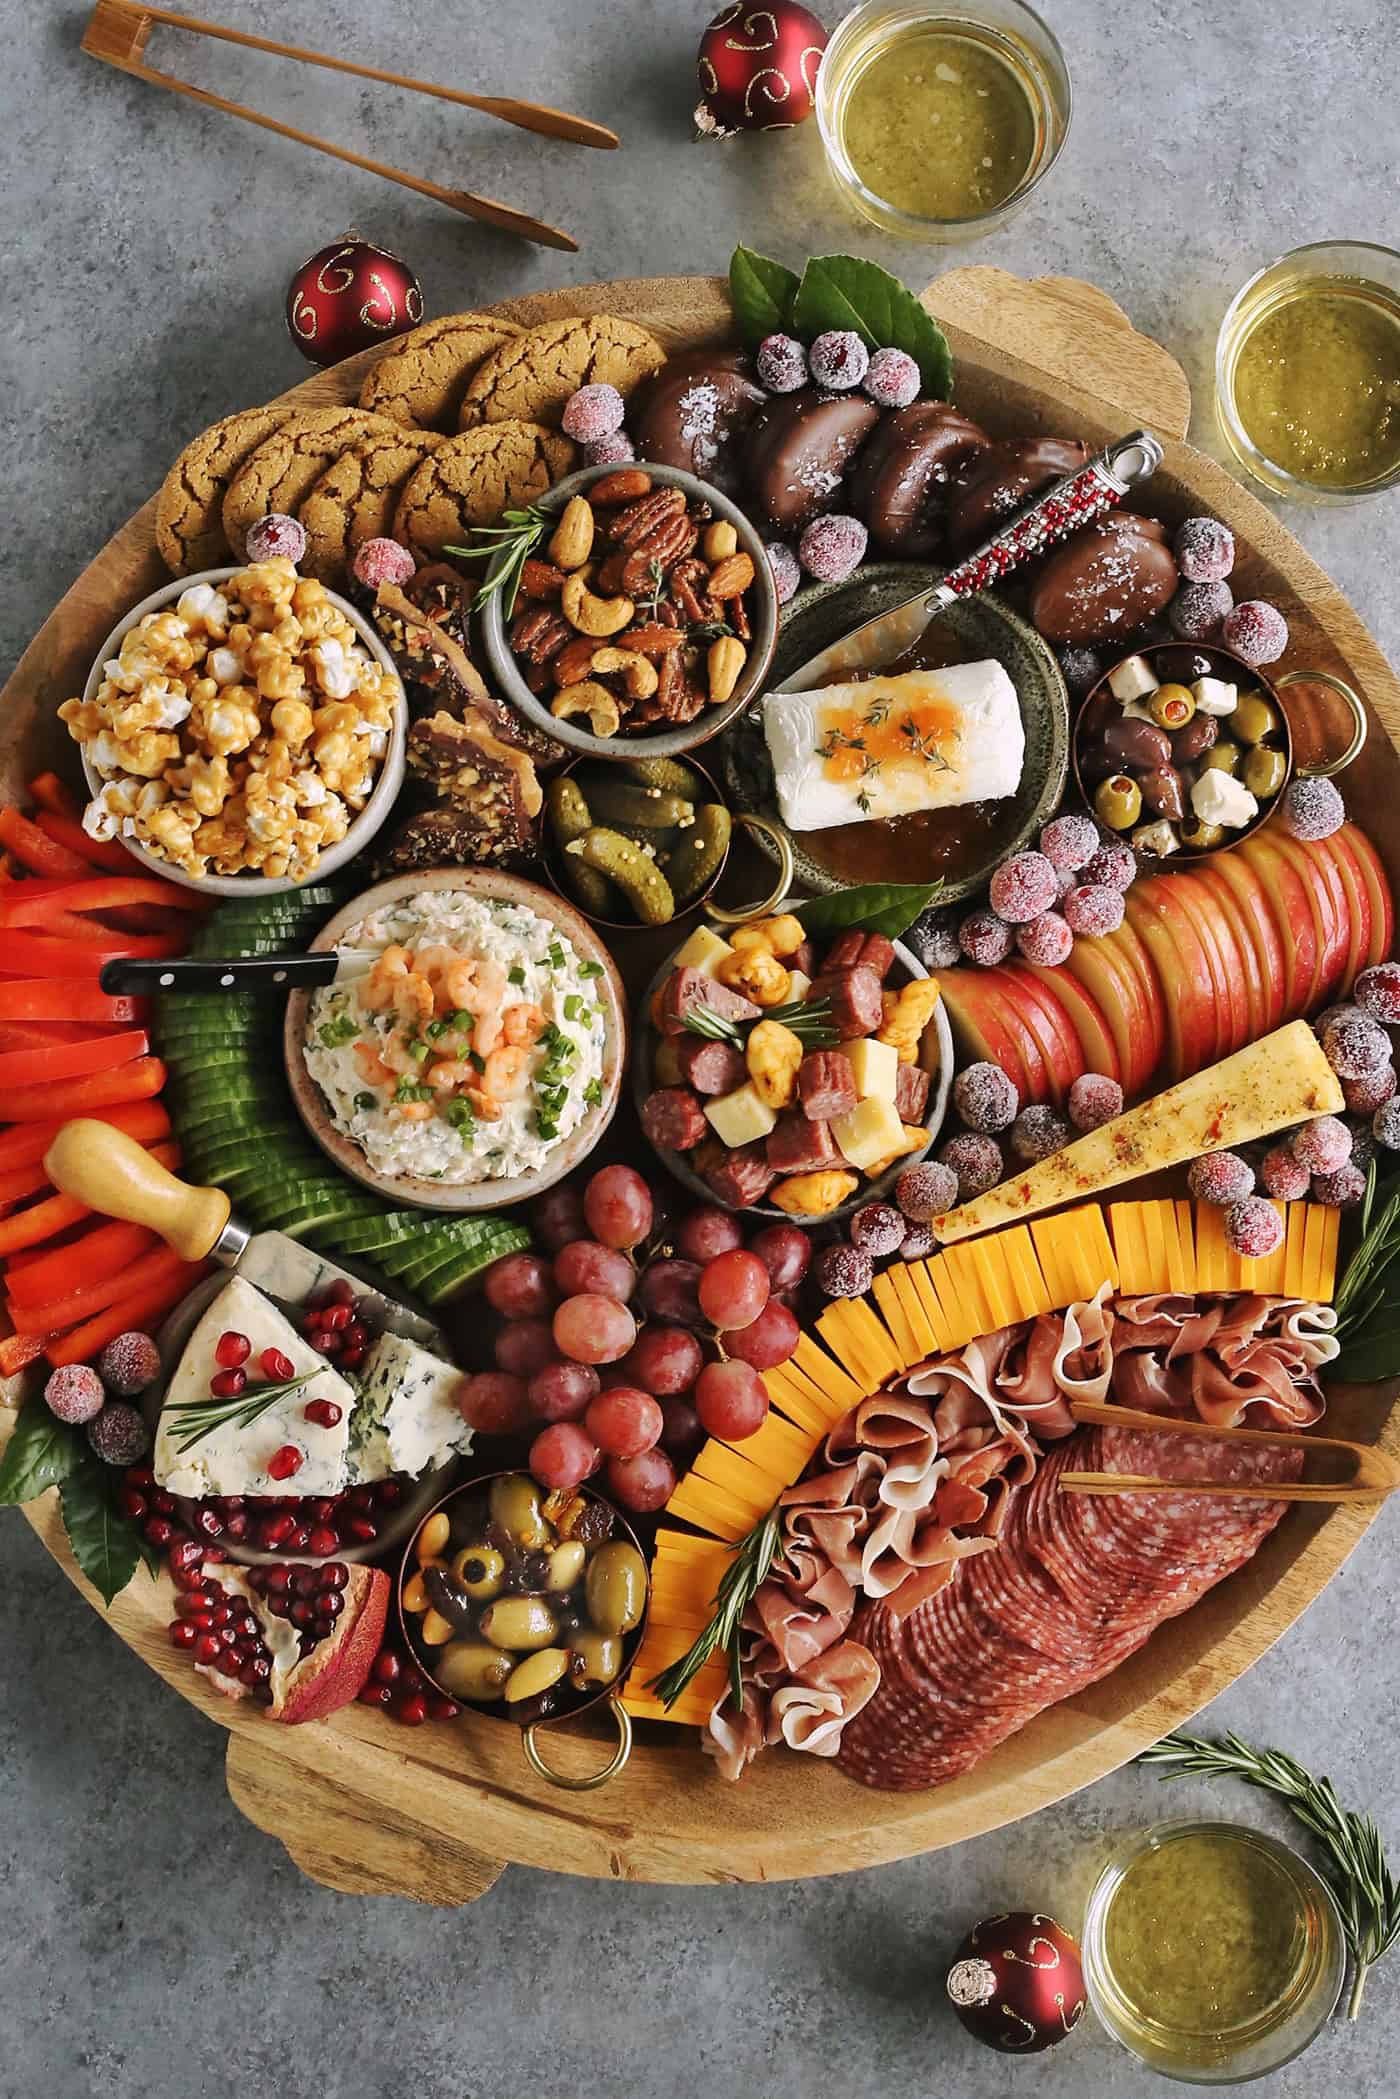 Large Wooden Charcuterie Board